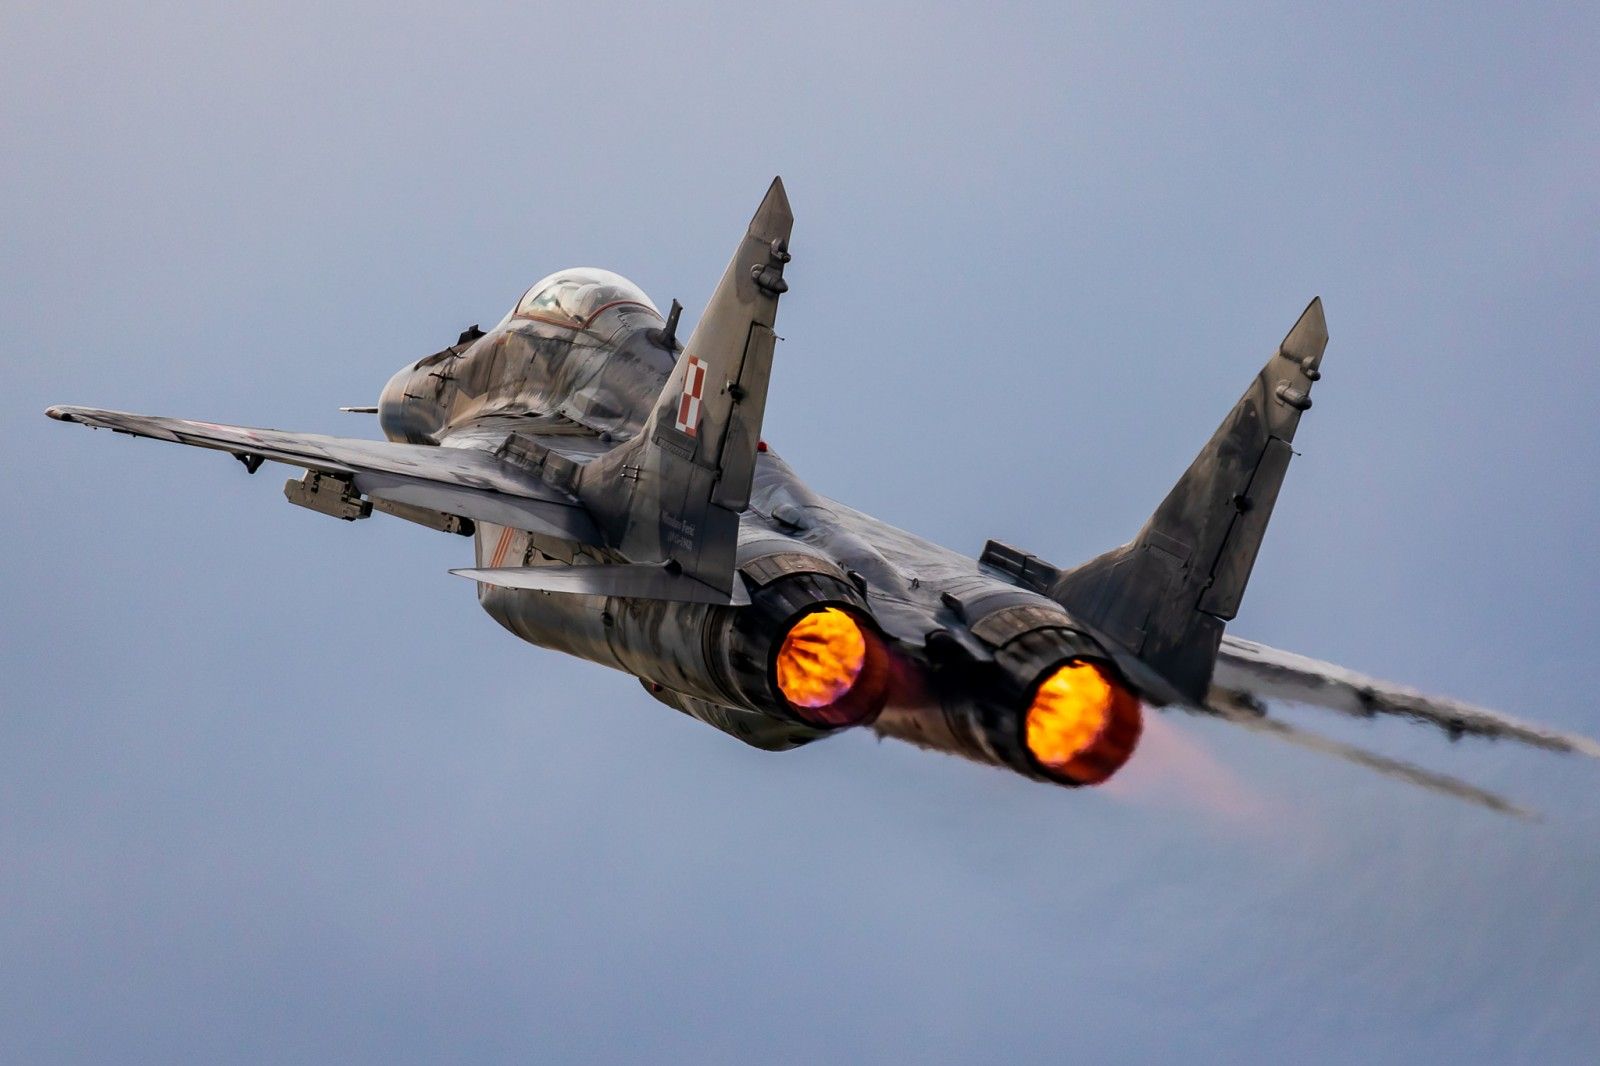 Wallpaper, 500px, mig Fulcrum, afterburner, jet engine, aircraft, military, airshows, aerial 2048x1365